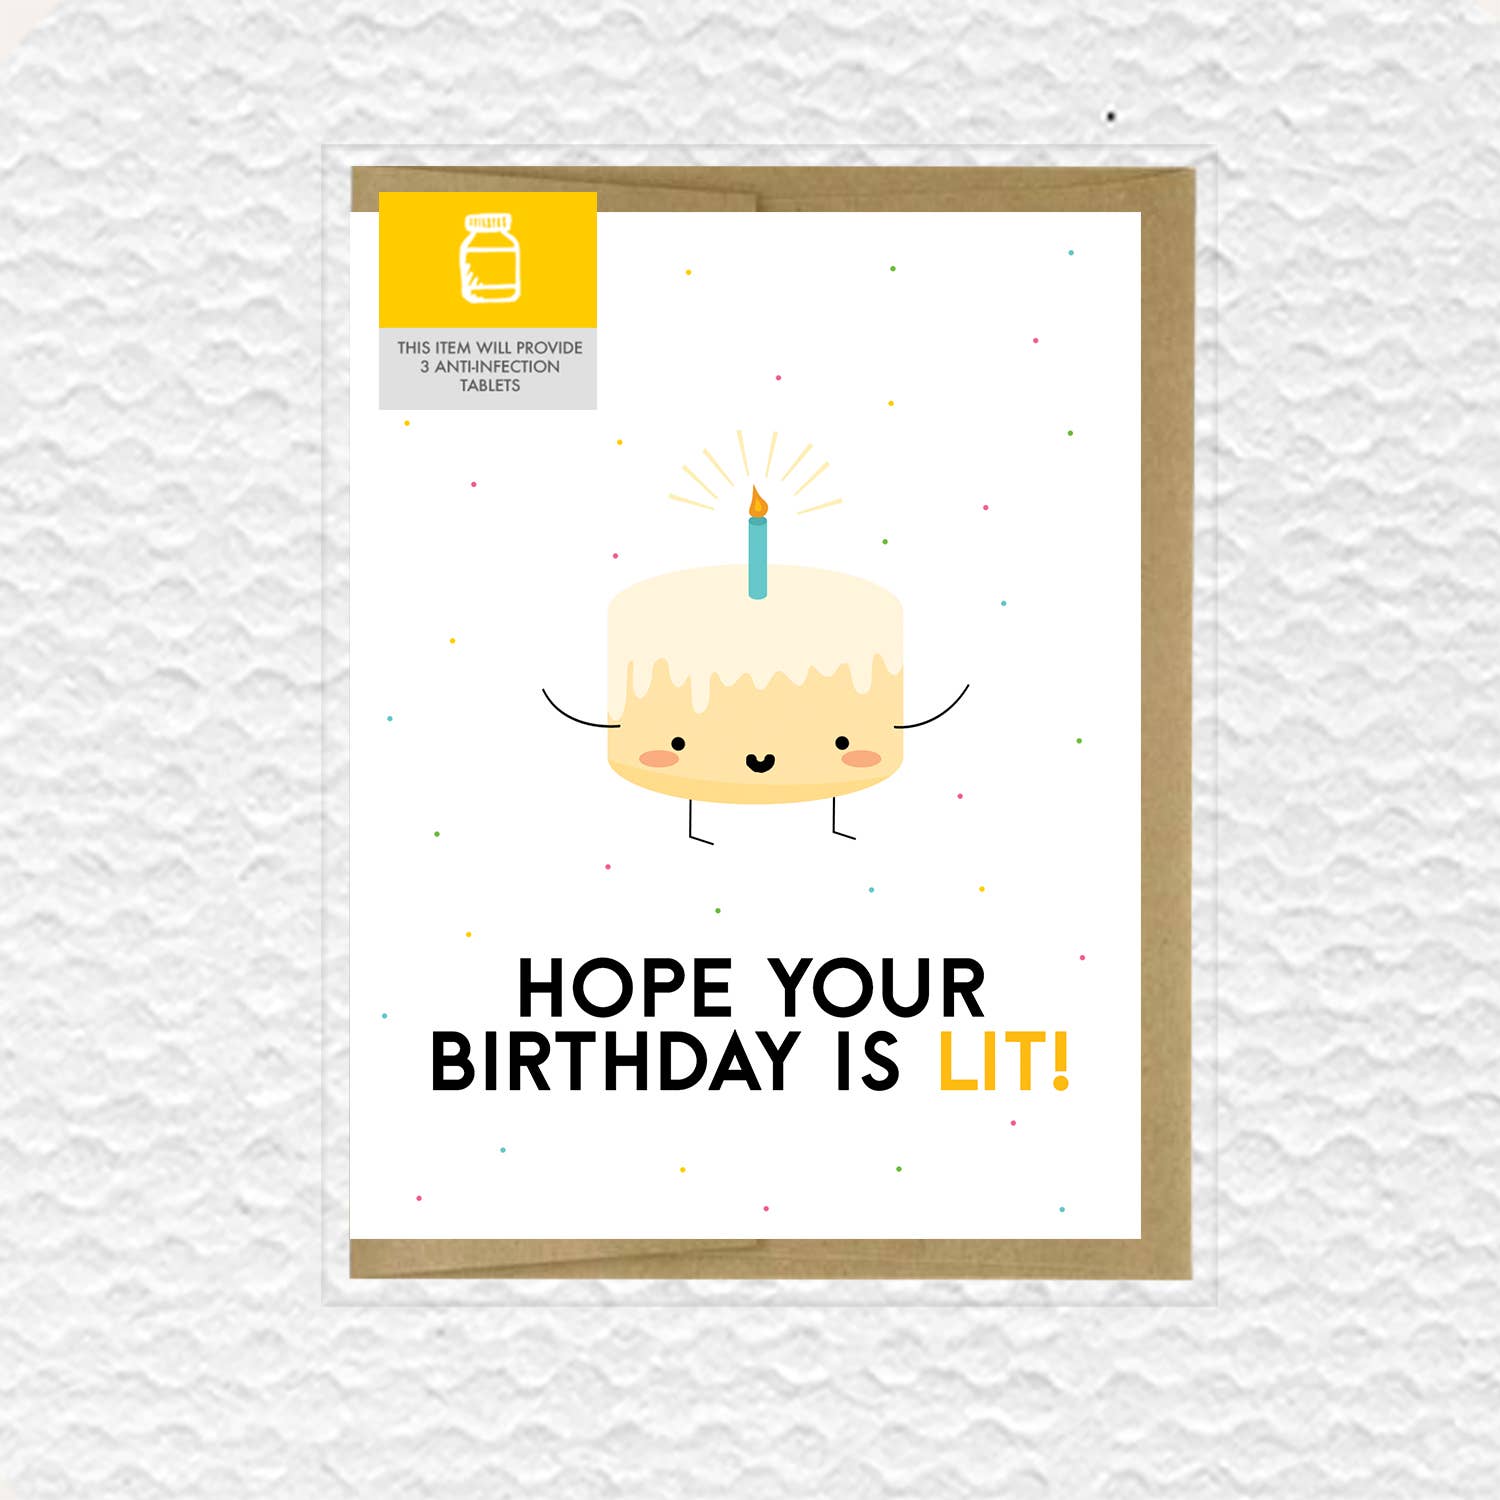 Hope Your Birthday Is Lit! Birthday Card